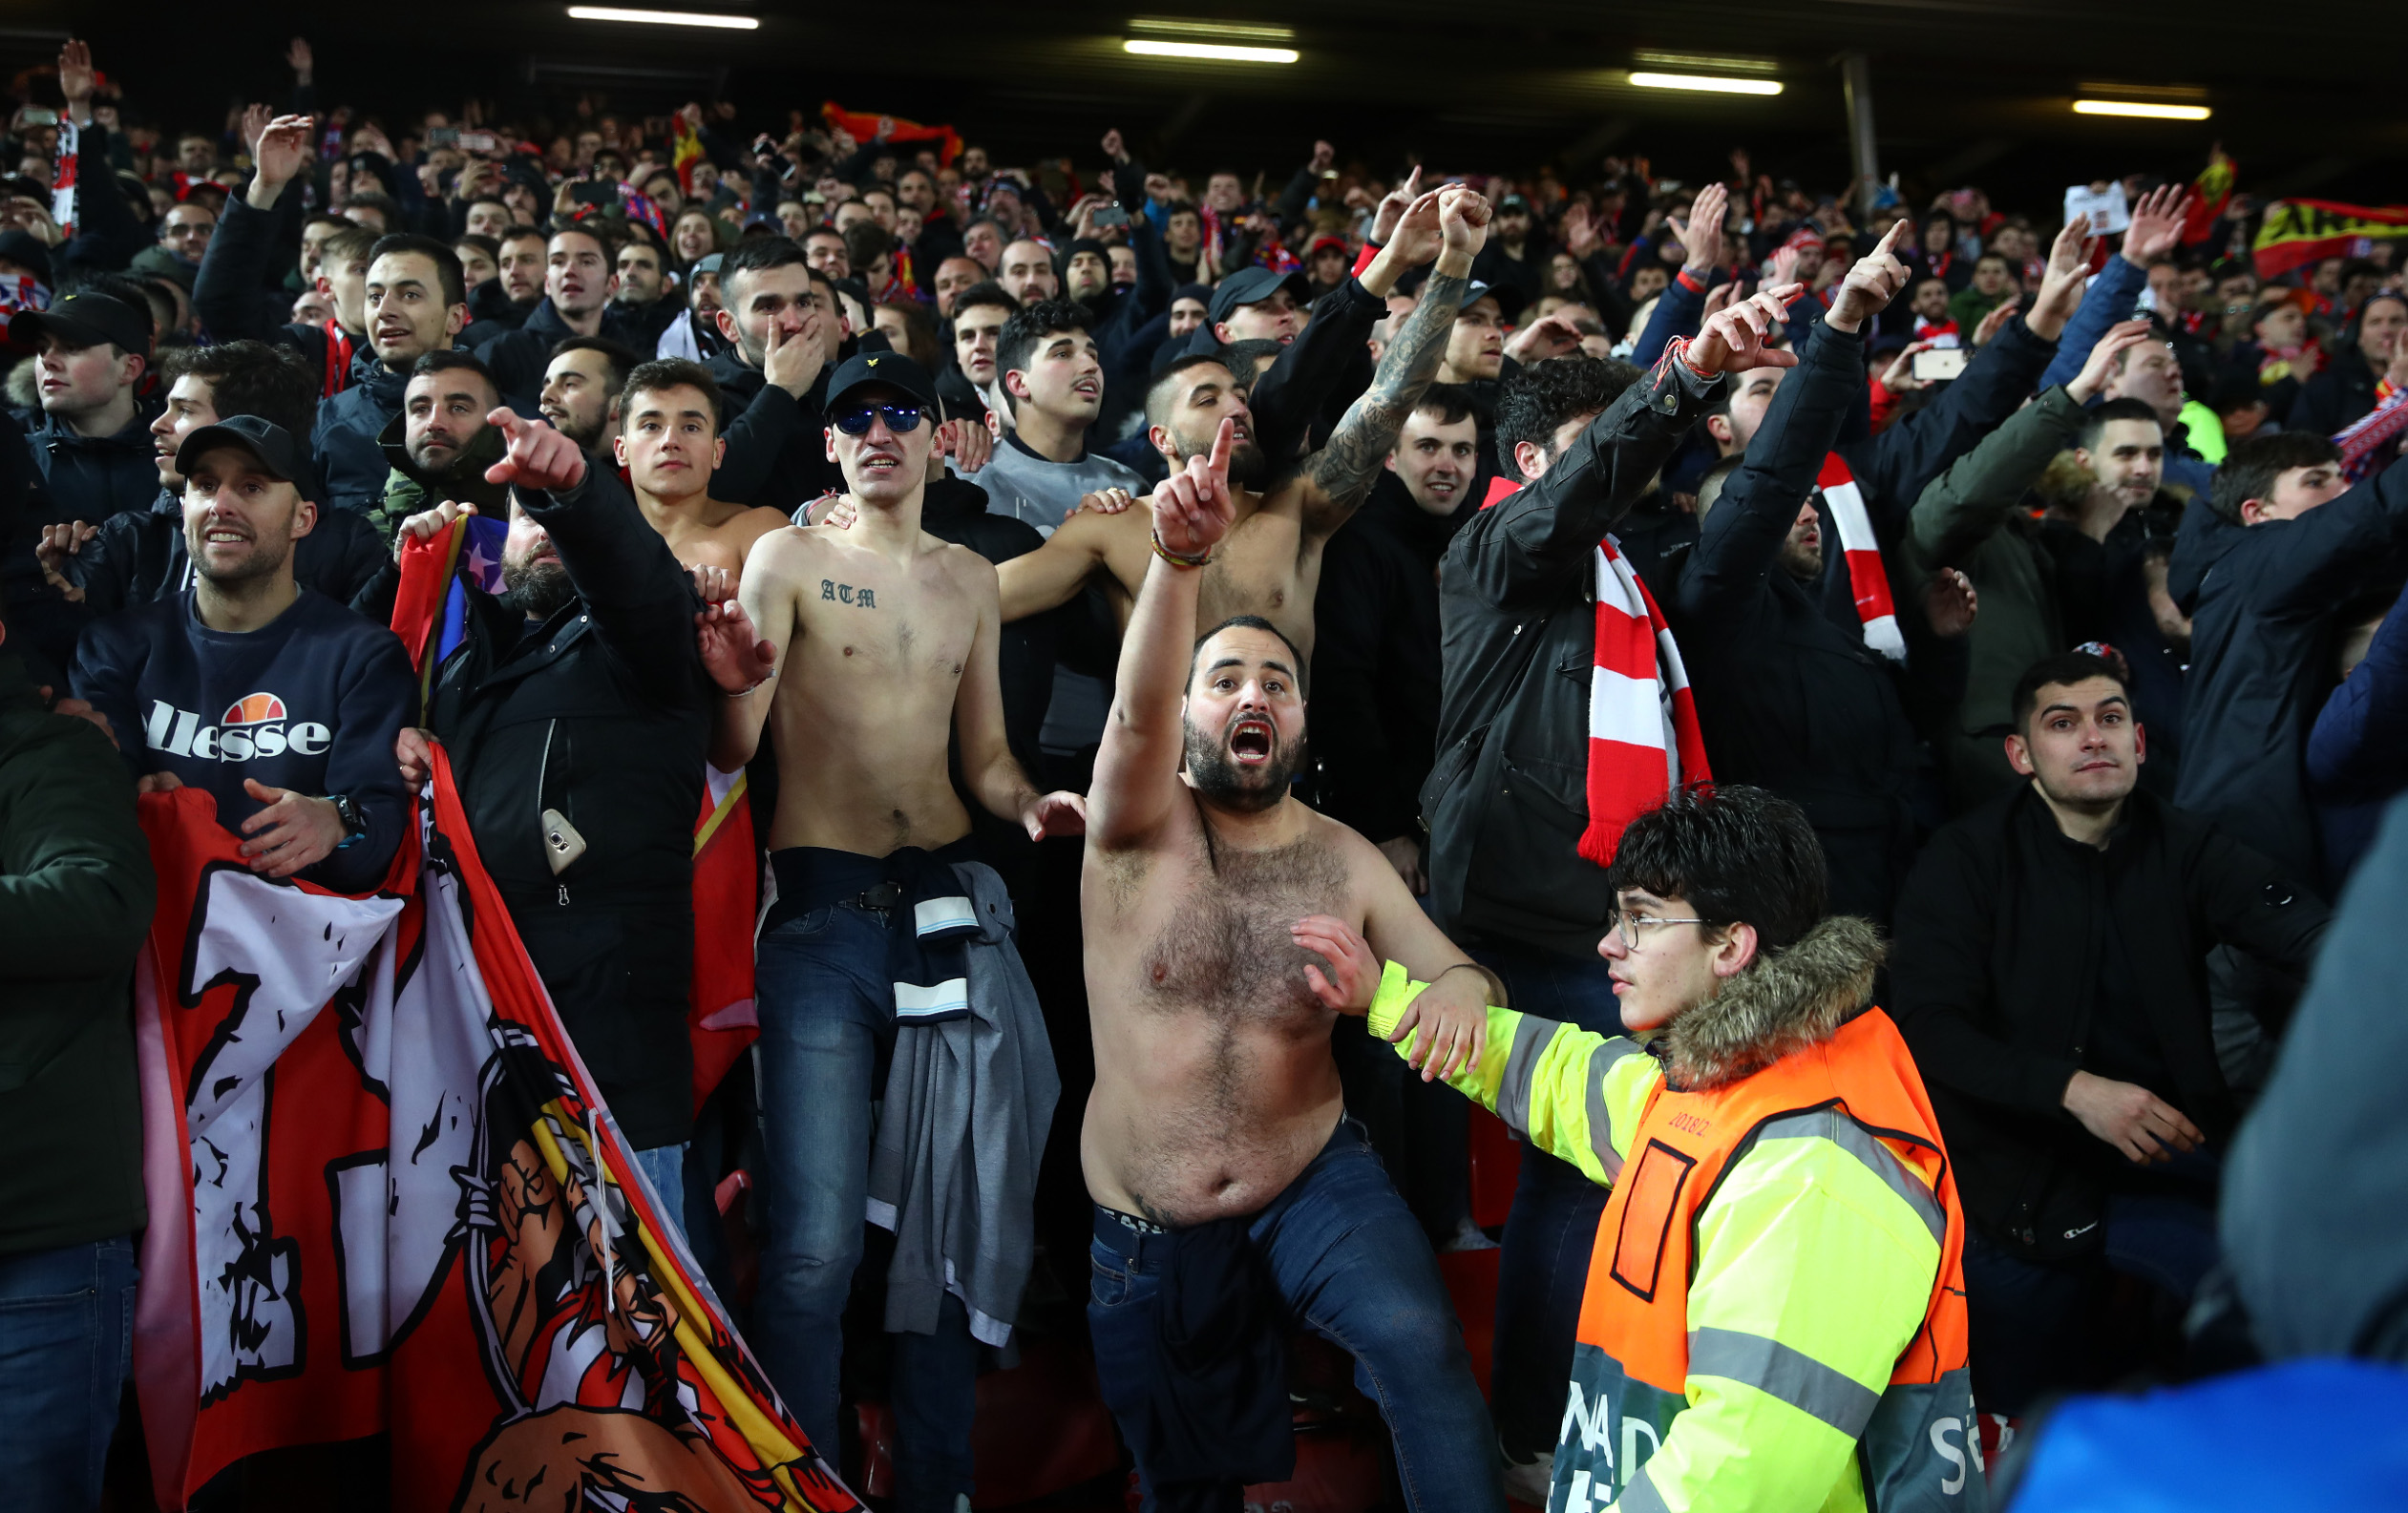 LIVERPOOL, ENGLAND - MARCH 11: Atletico Madrid fans celebrate victory after the UEFA Champions League round of 16 second leg match between Liverpool FC and Atletico Madrid at Anfield on March 11, 2020 in Liverpool, United Kingdom.  (Photo by Julian Finney/Getty Images)